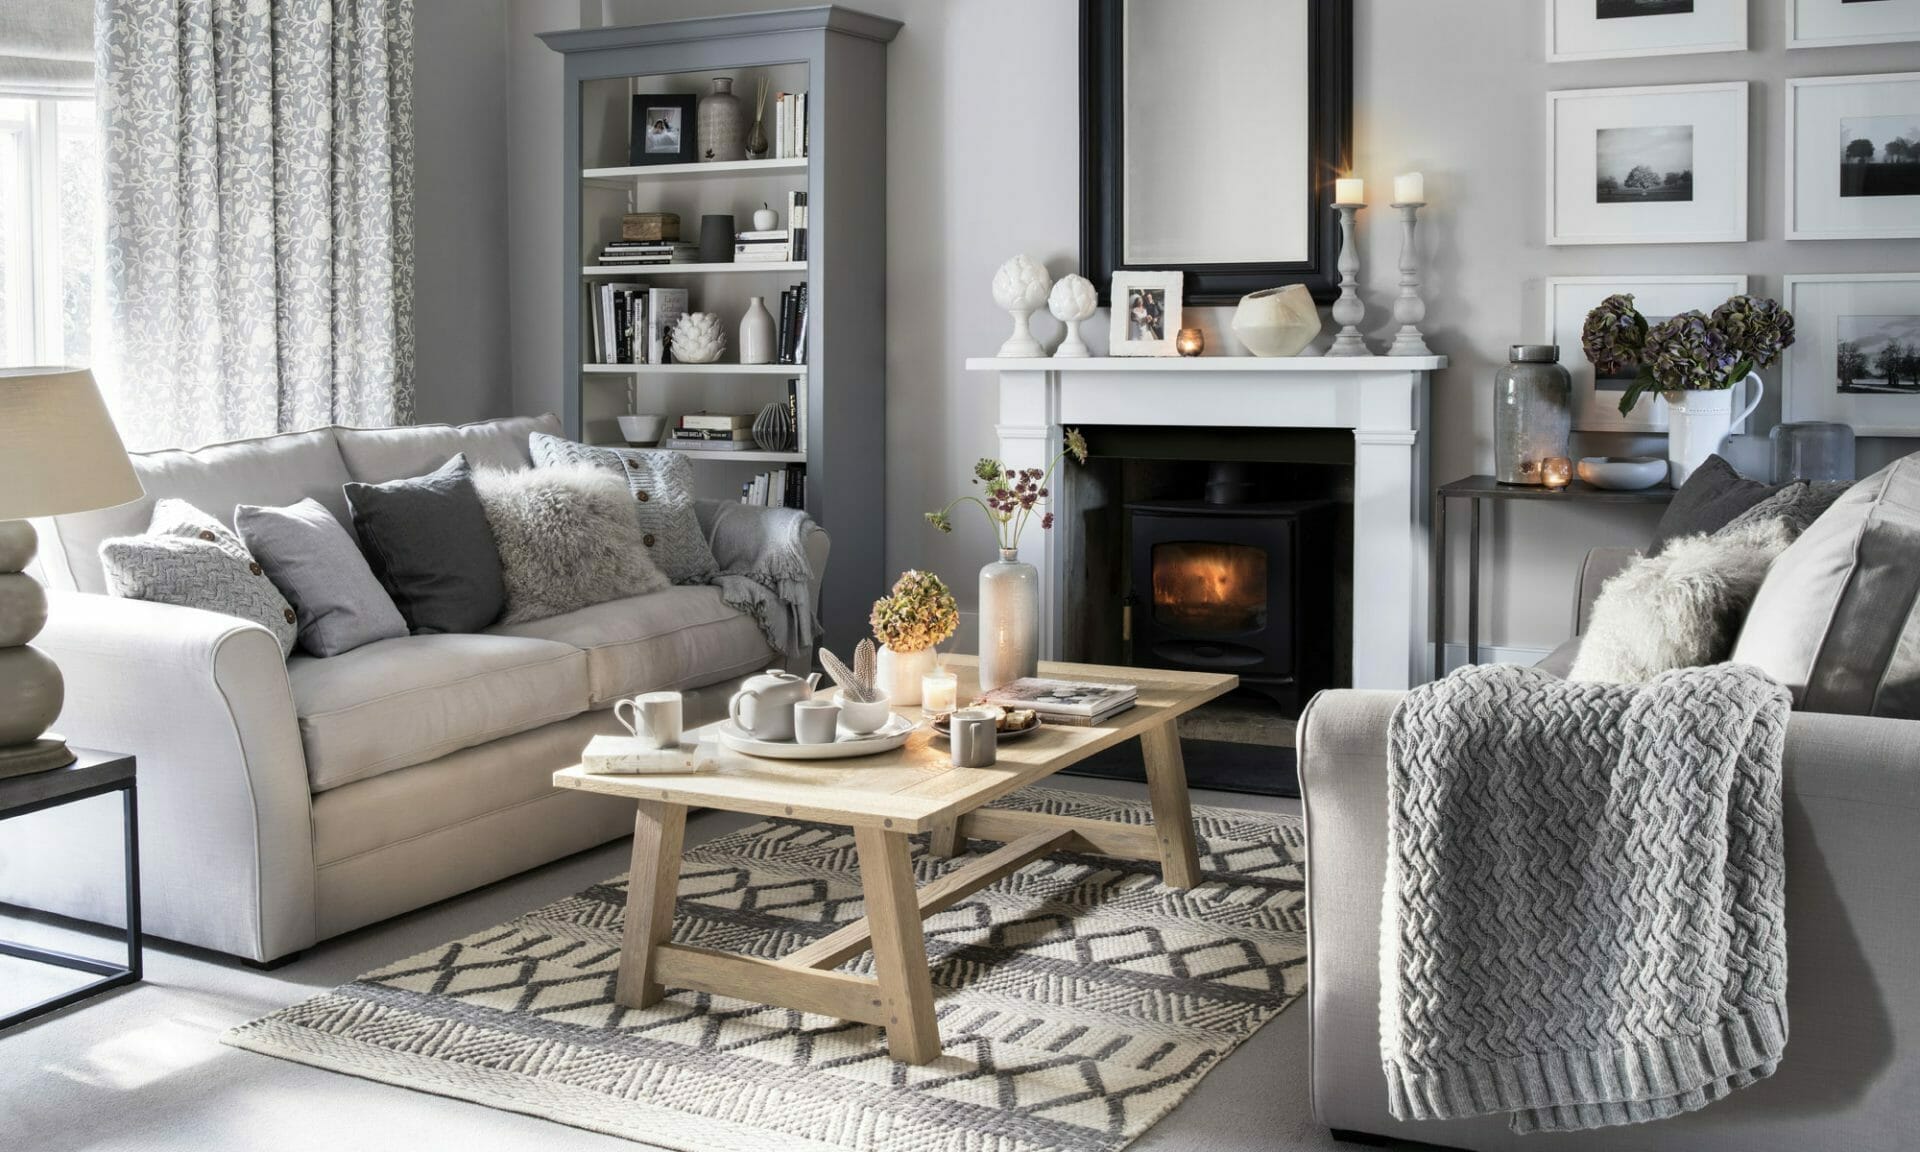 Winter Decor and Lighting Ideas: Turn Your Home into a Cozy Wonderland